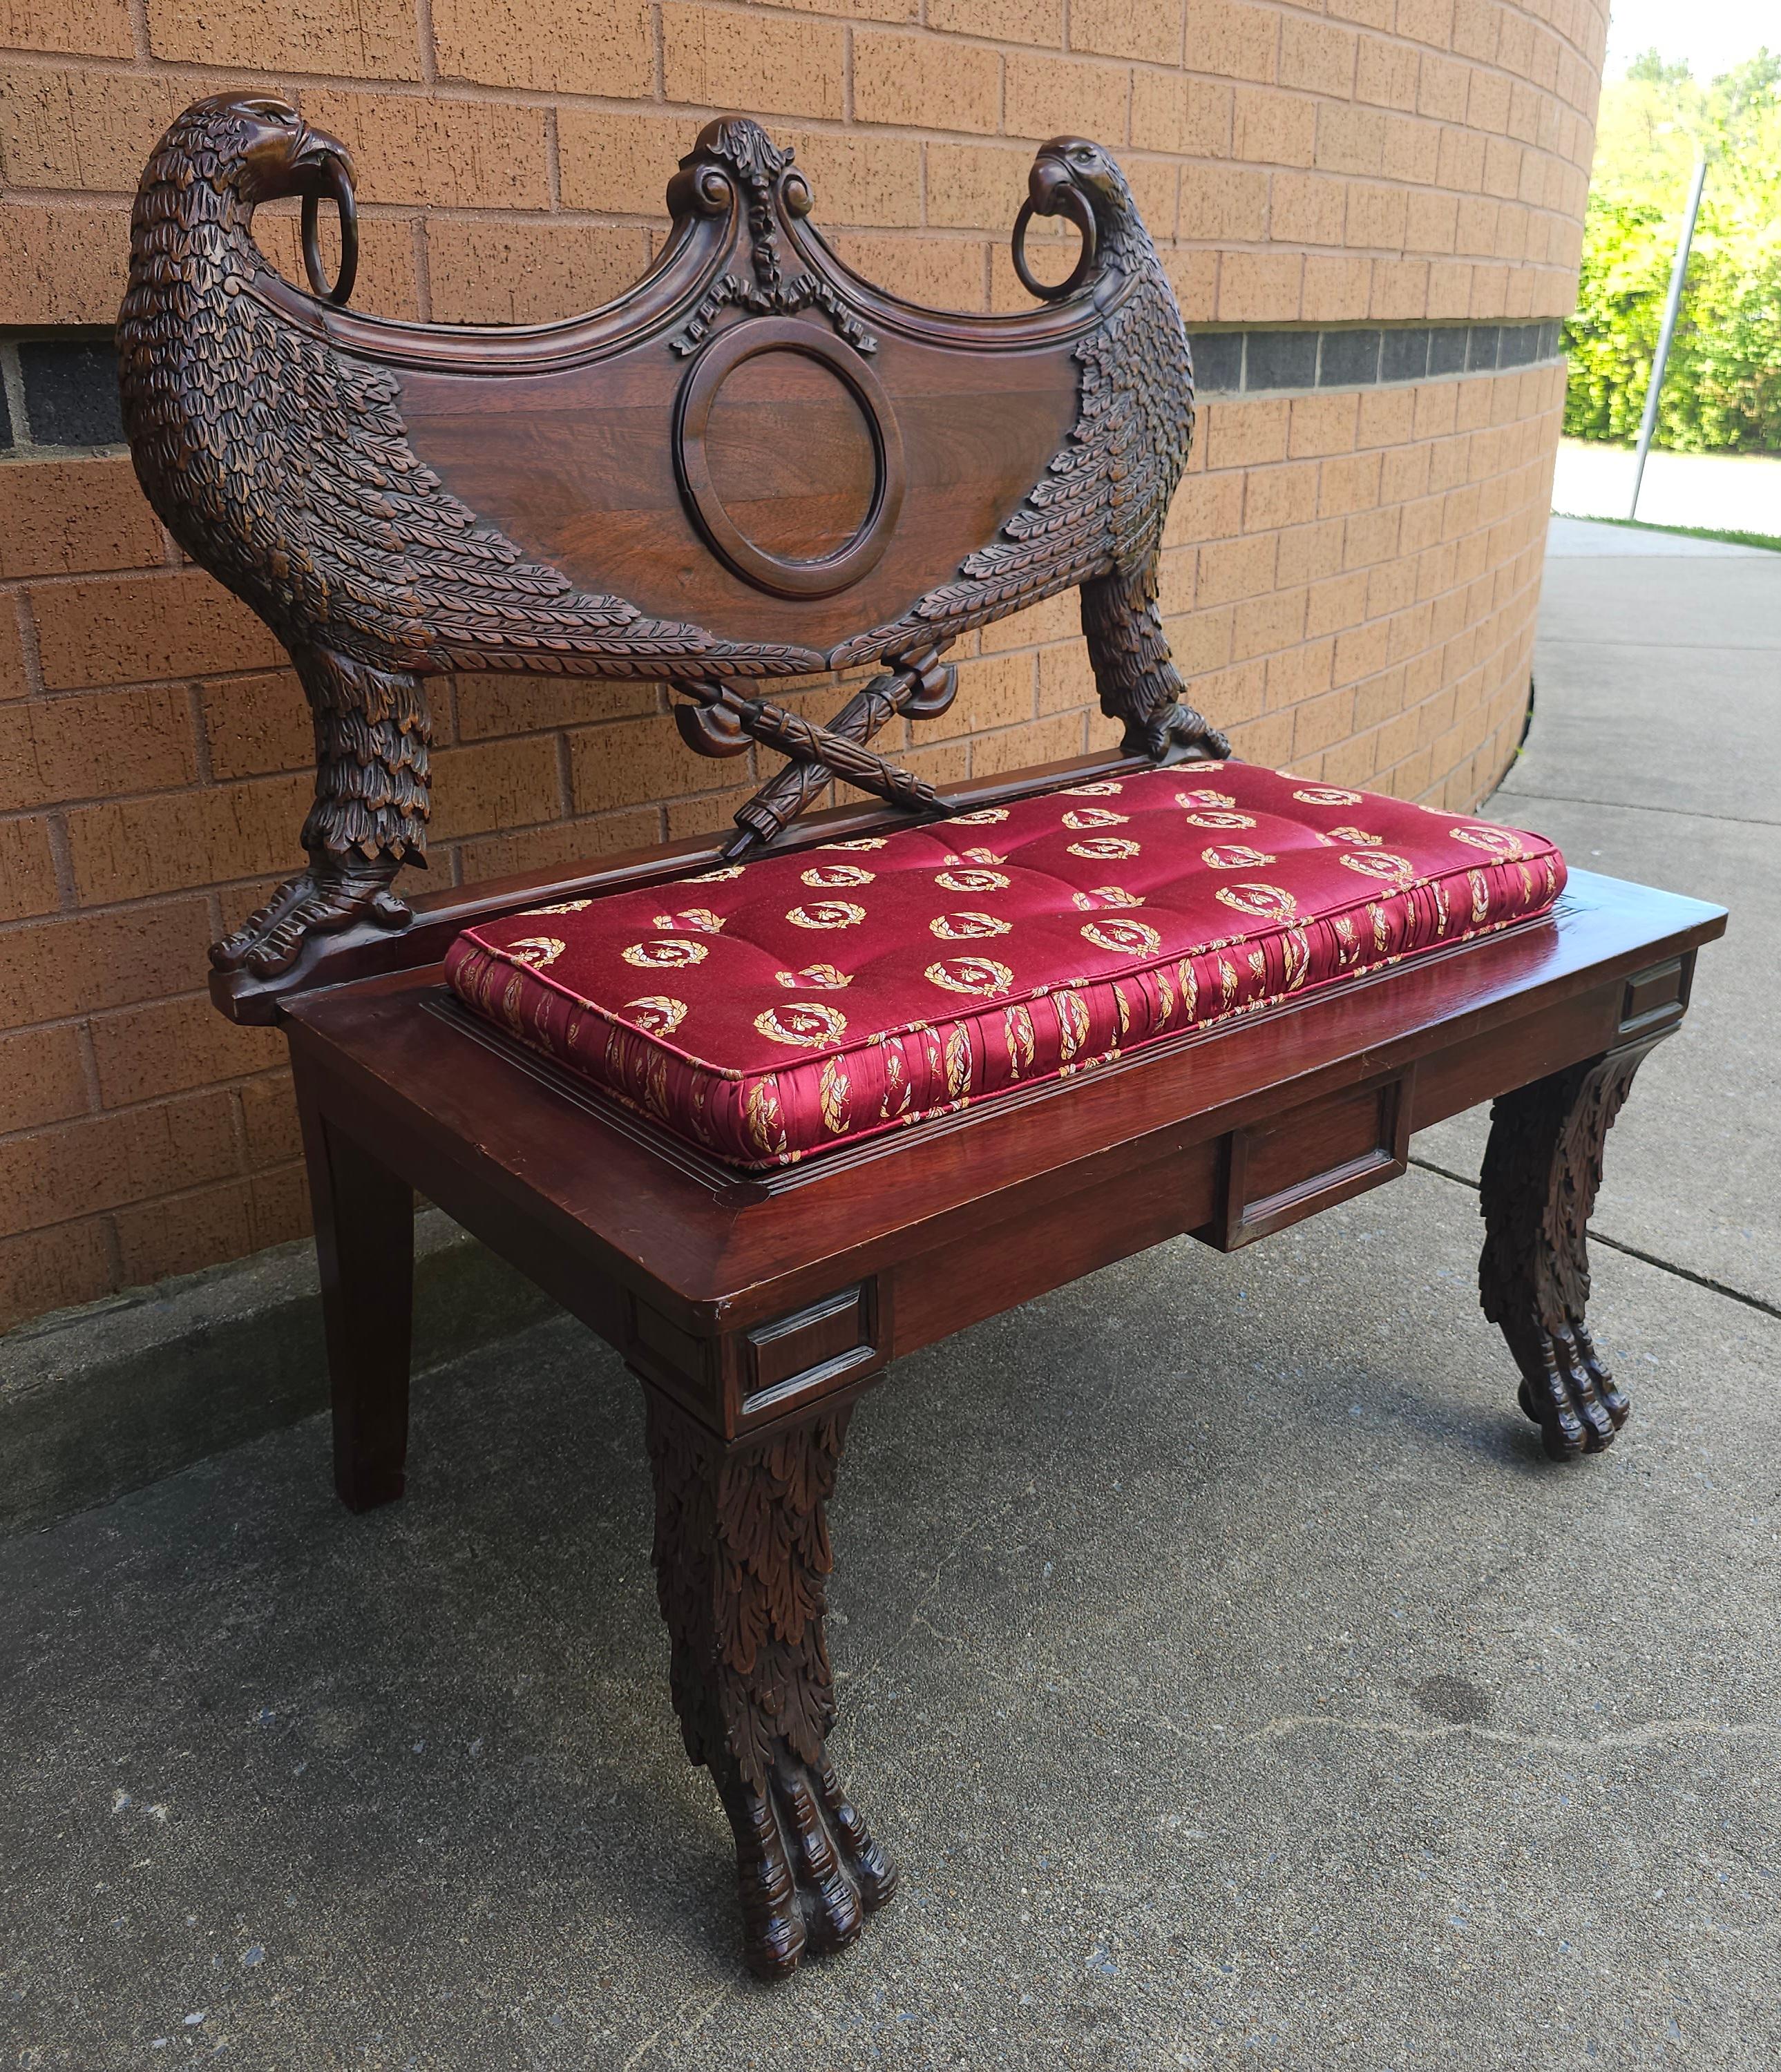 20th Century Empire Style Heraldic Coat of Arms Carved Mahogany Double Eagle Bench For Sale